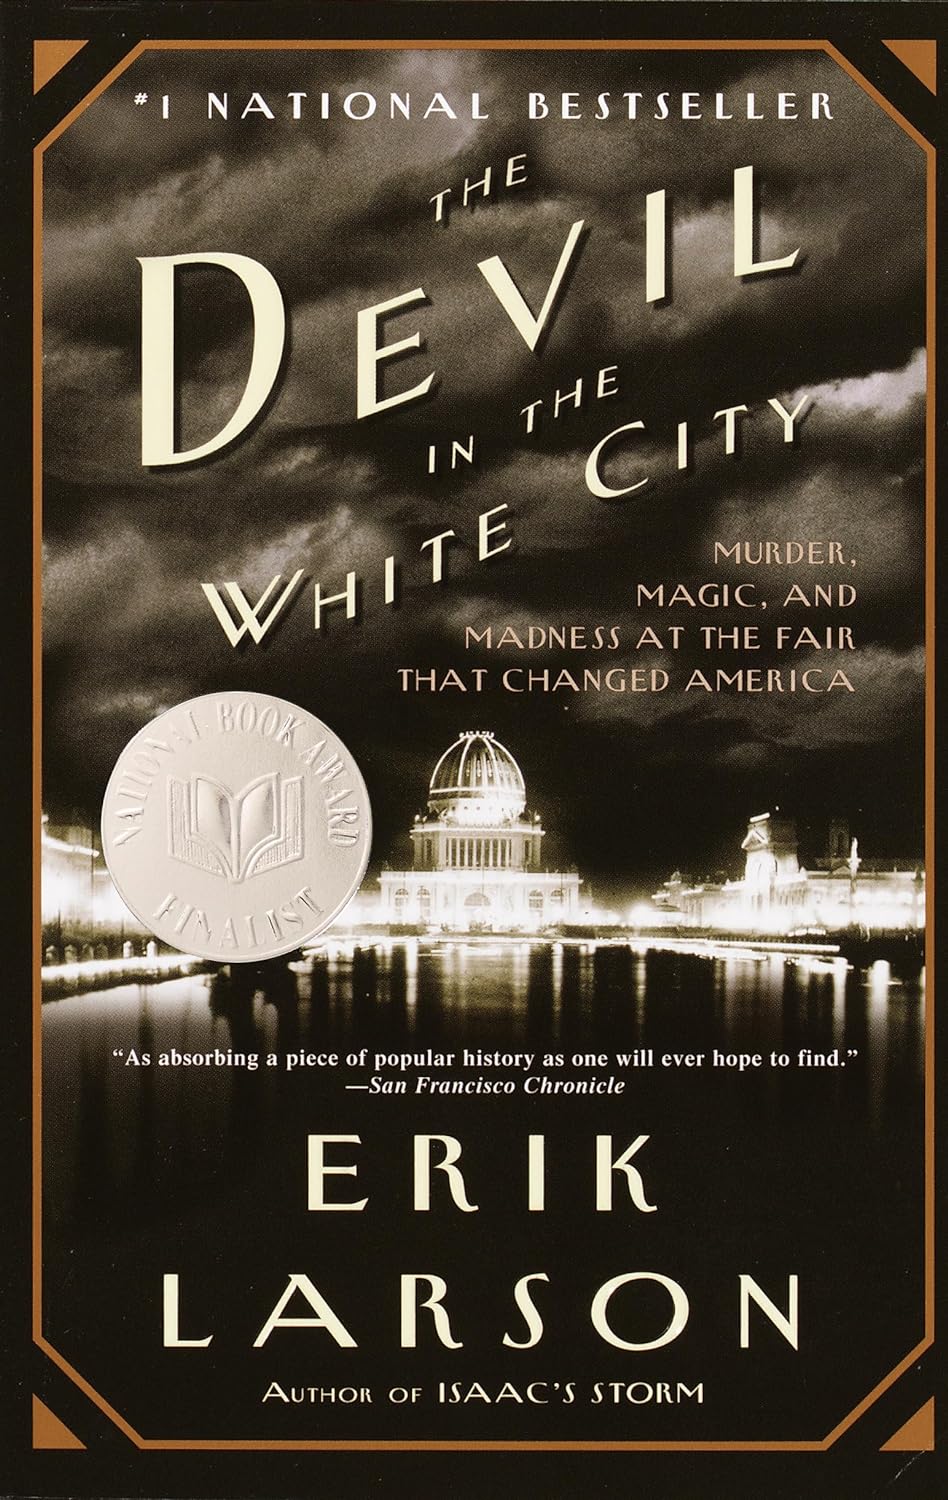 The Devil in the White City Murder, Magic, and Madness at the Fair That Changed America by Erik Larson (2003)